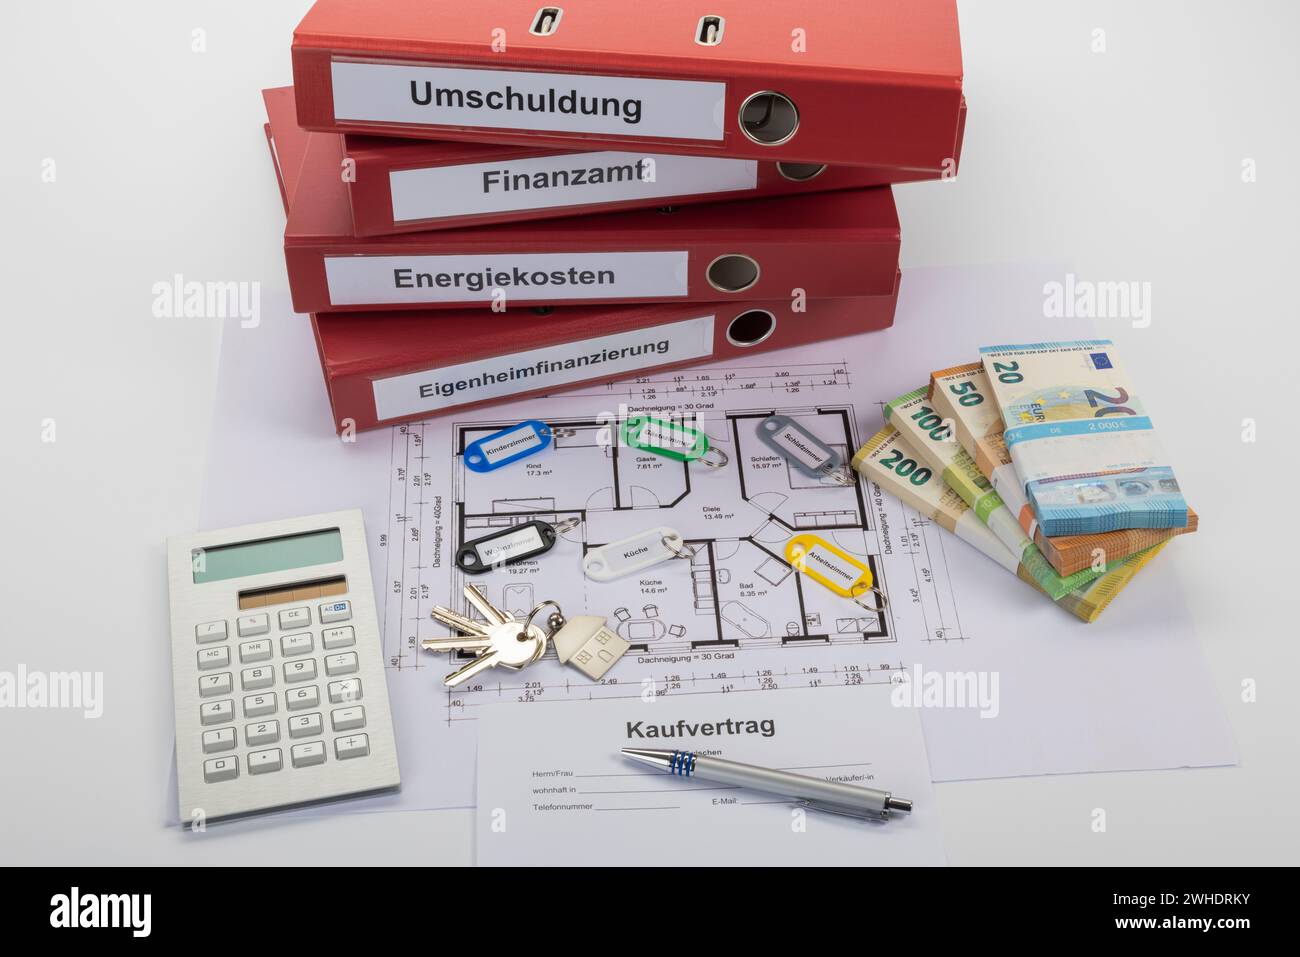 Purchase contract, bunch of keys, different colored key rings, with lettering, floor plan, red file folders with lettering, home financing, energy costs, tax office, debt restructuring, calculator, ballpoint pen, banknotes, bundled, white background, Stock Photo